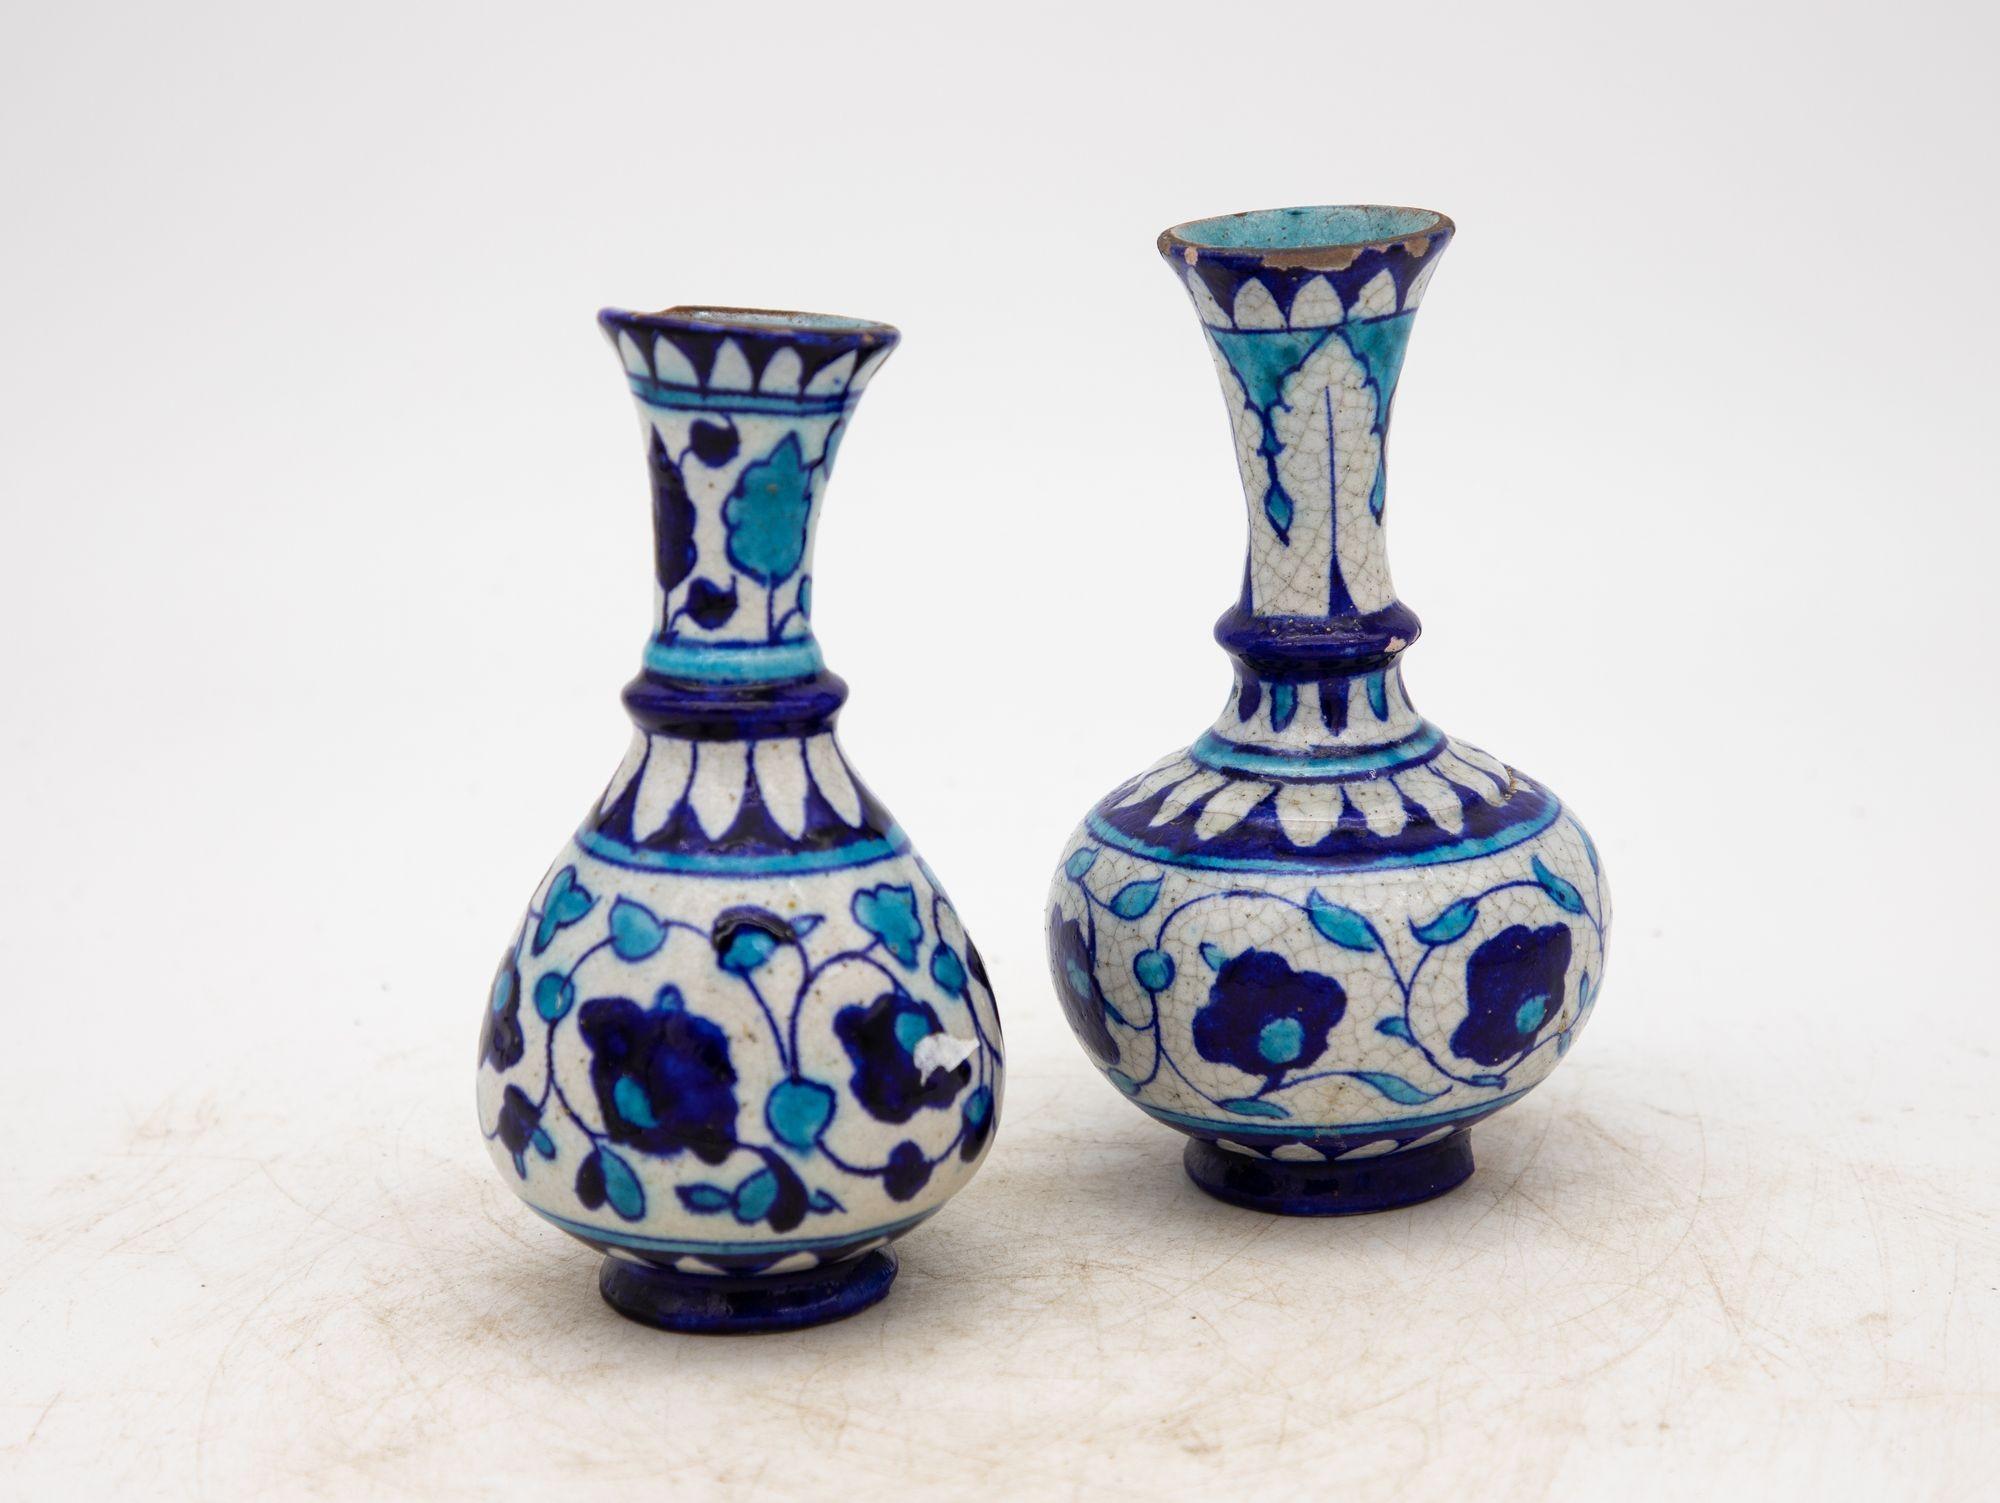 Dating back to the 1890s, this exquisite pair of Iznik vases epitomizes the timeless allure of Turkish pottery. Adorned with the iconic cobalt and turquoise hues against a white backdrop, these vases exude the classic charm that defines Iznik